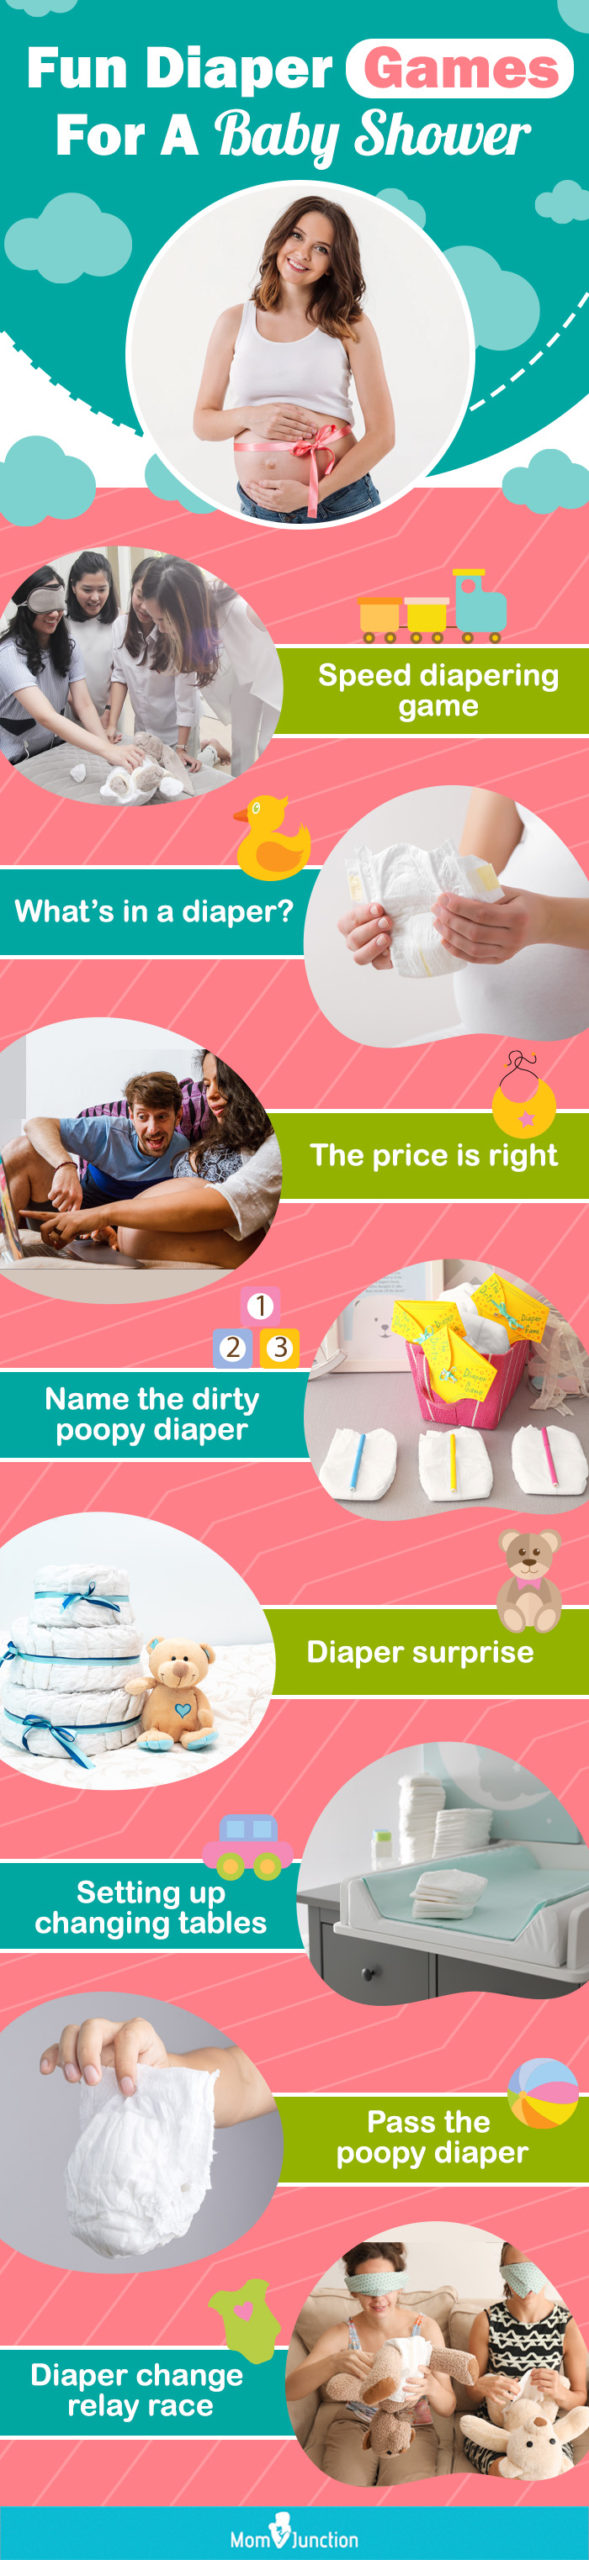 fun diaper games for a baby shower [infographic]